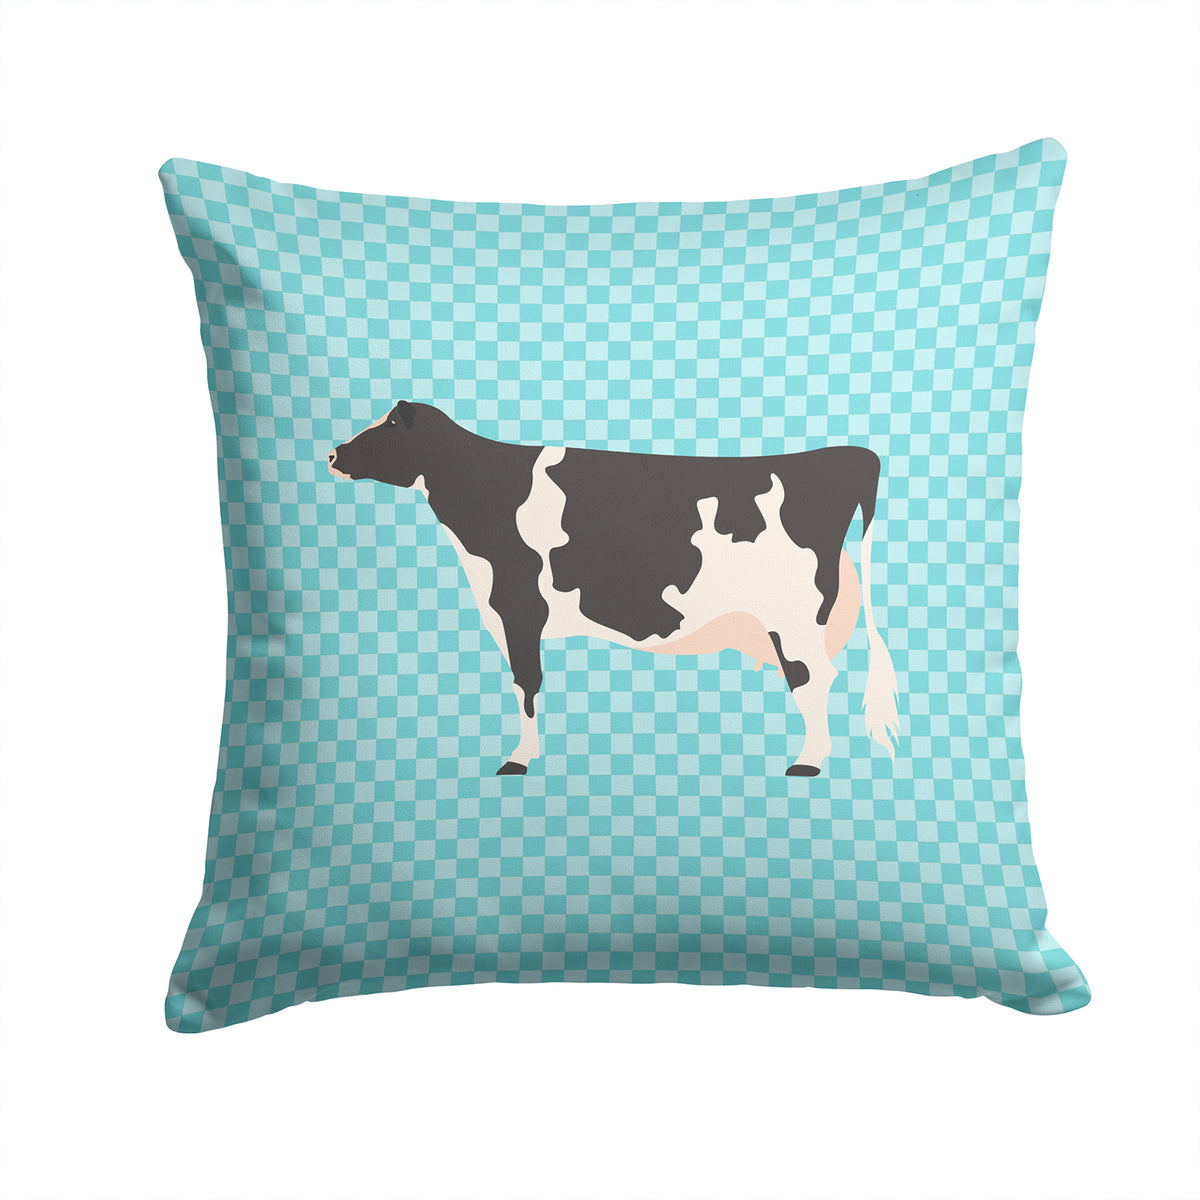 Holstein Cow Blue Check Fabric Decorative Pillow BB7996PW1414 - the-store.com